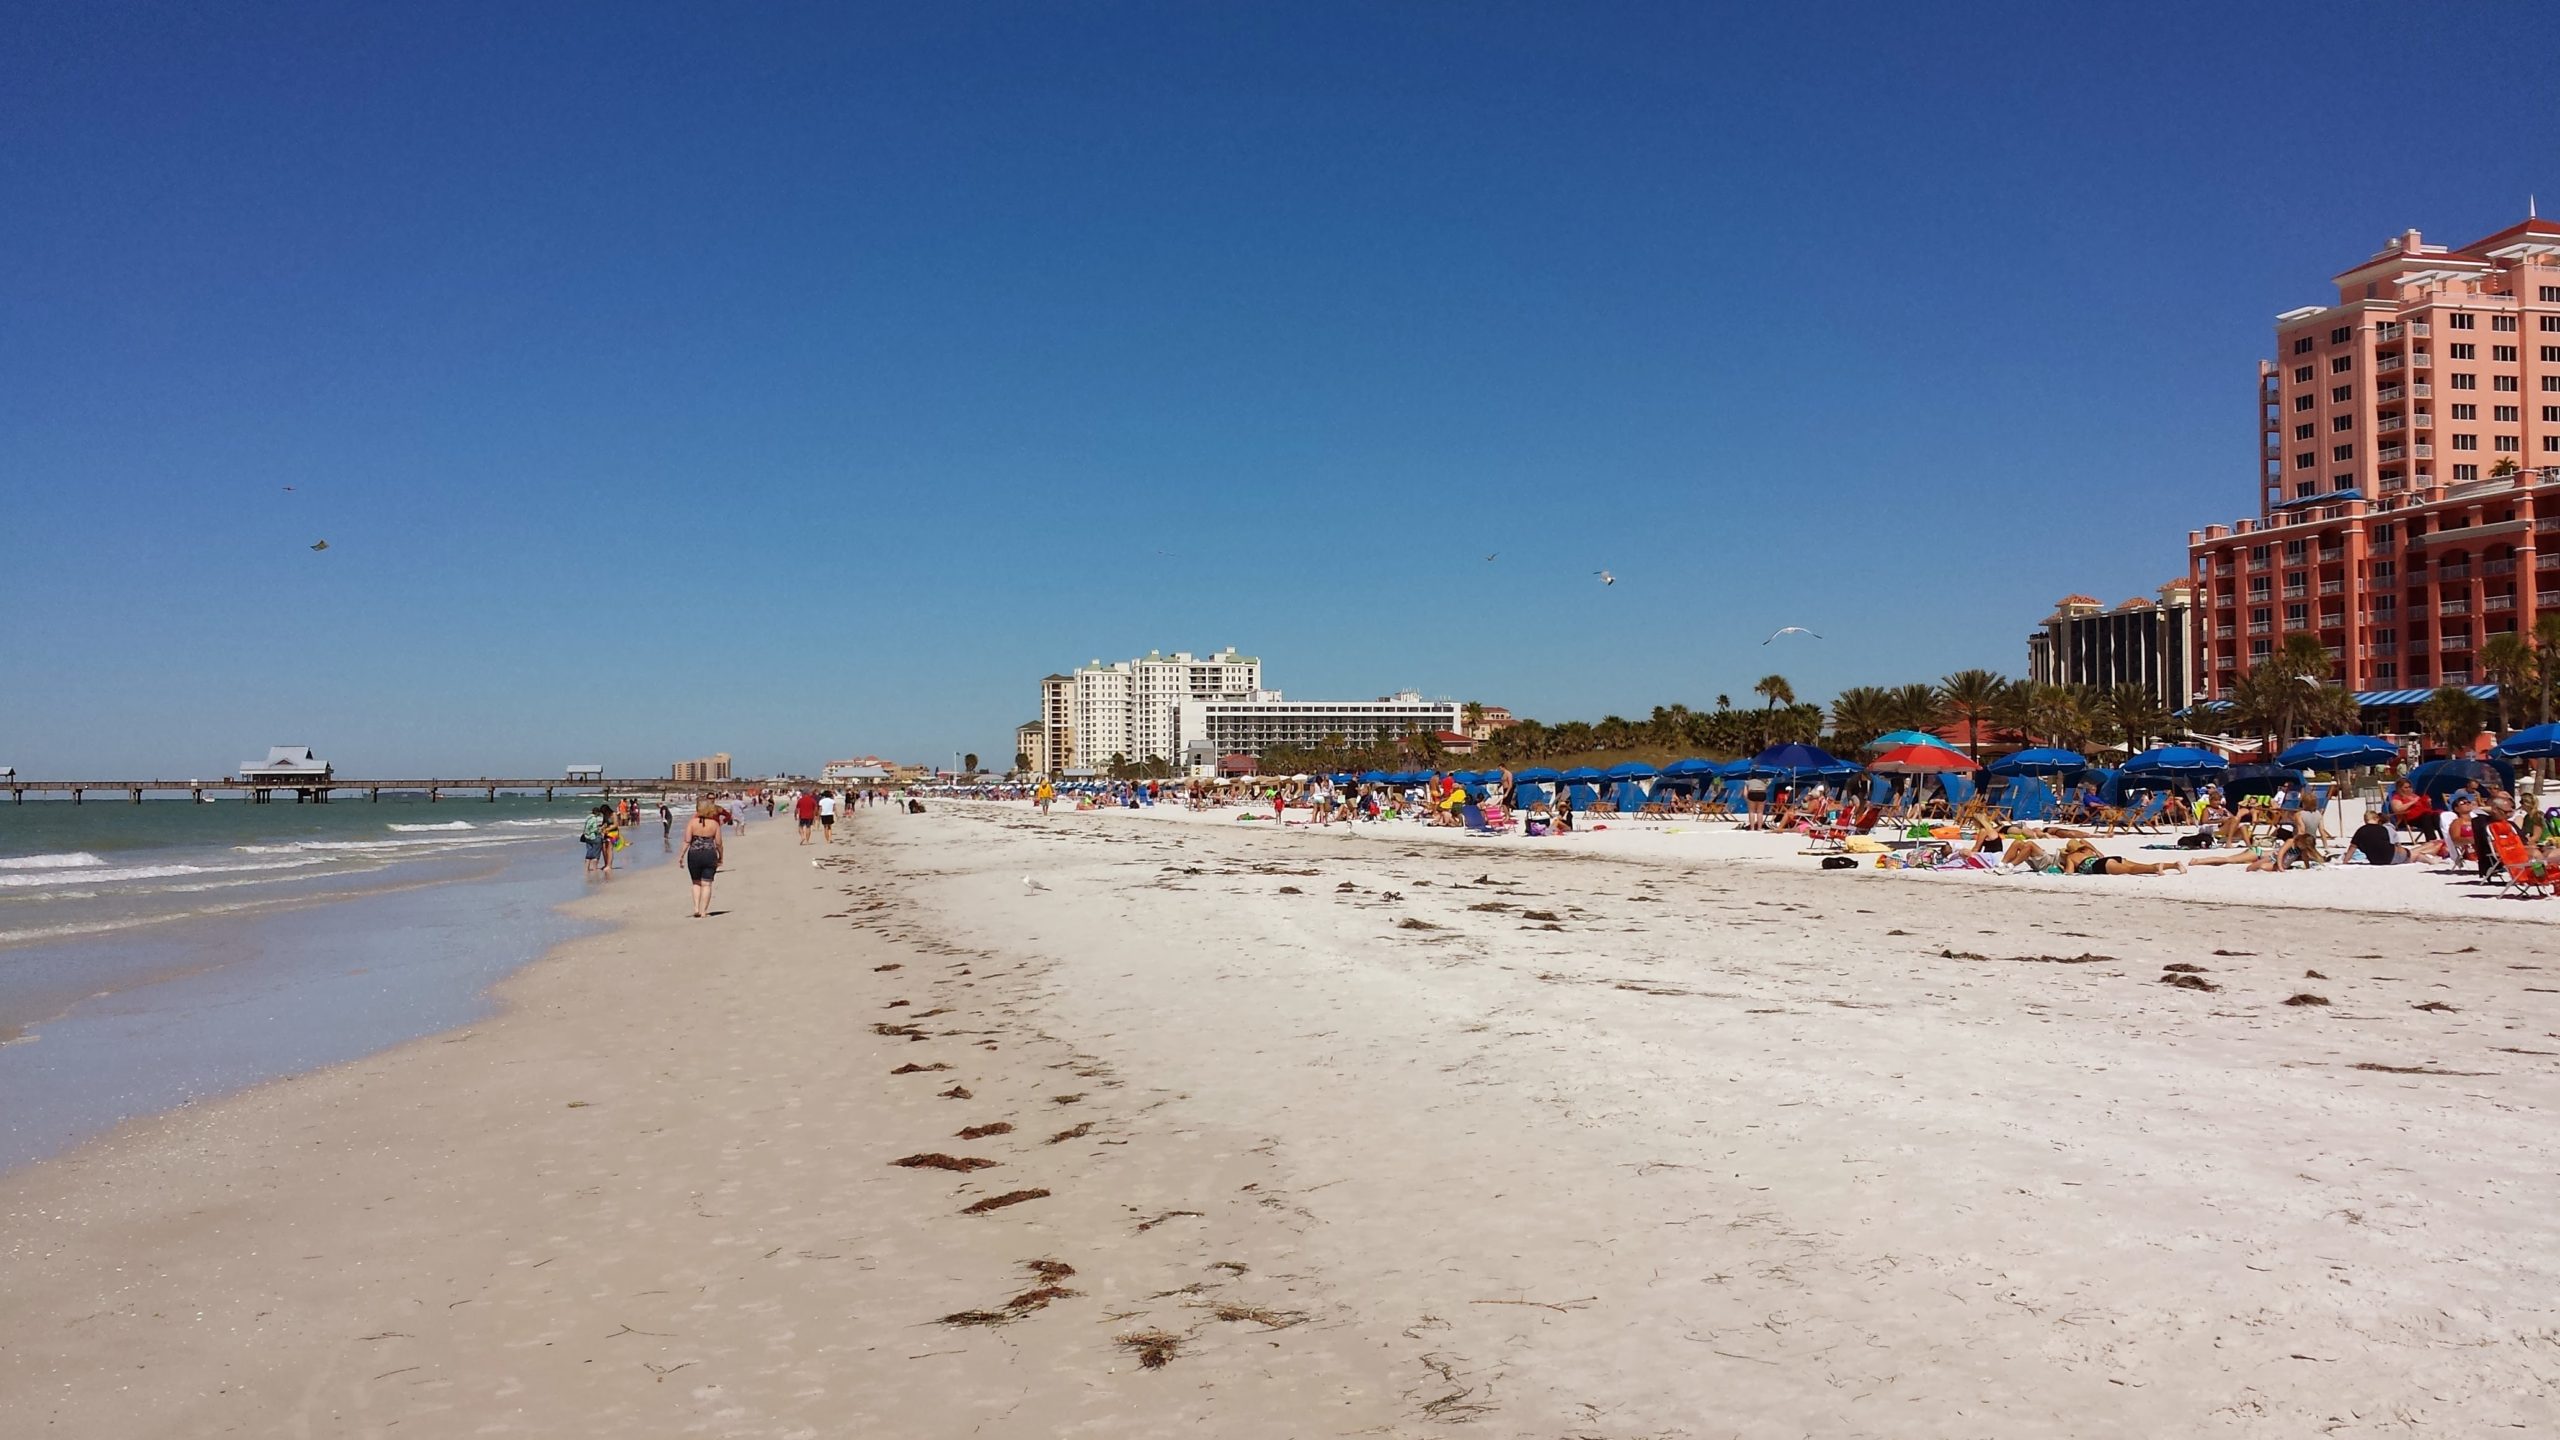 Florida Fun Getaways for Couples- Visit Clearwater Beach